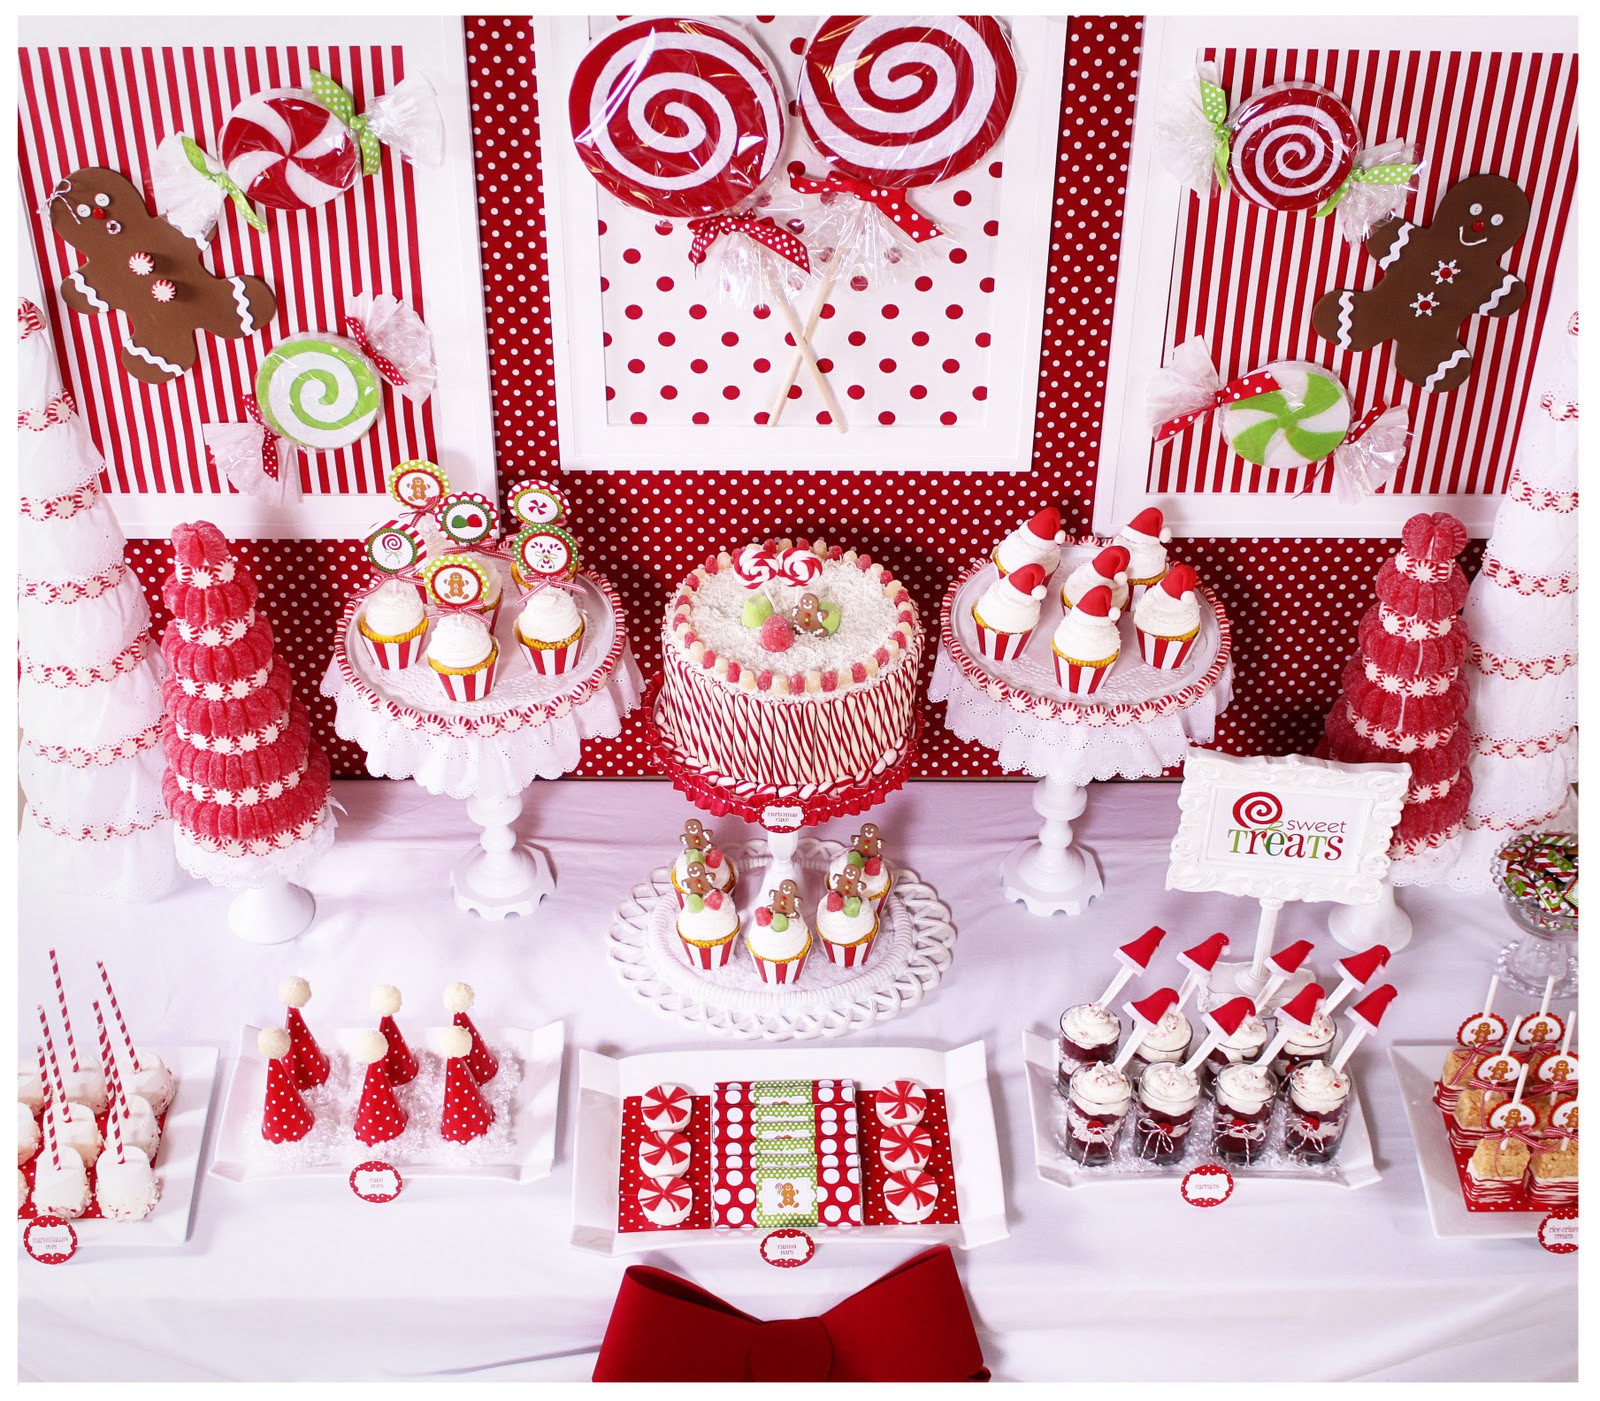 Fun Ideas For Holiday Party
 Kara s Party Ideas Candy Land Christmas Party